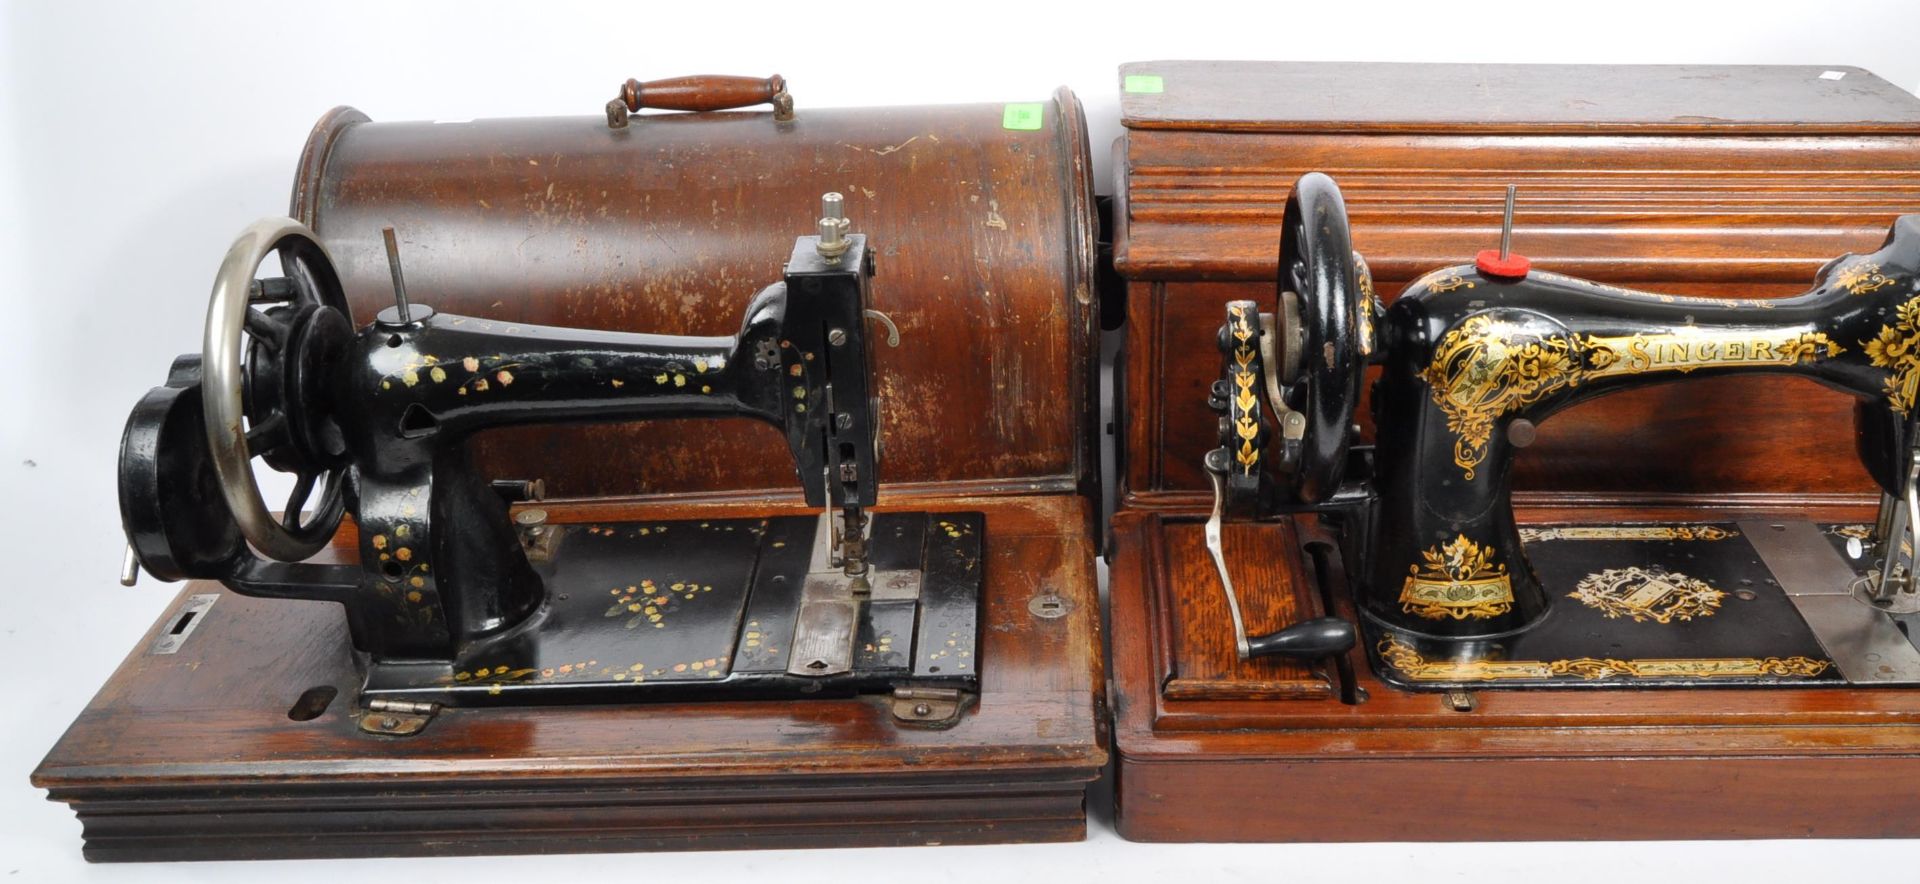 TWO EARLY 20TH CENTURY SEWING MACHINES - SINGER - Image 8 of 8